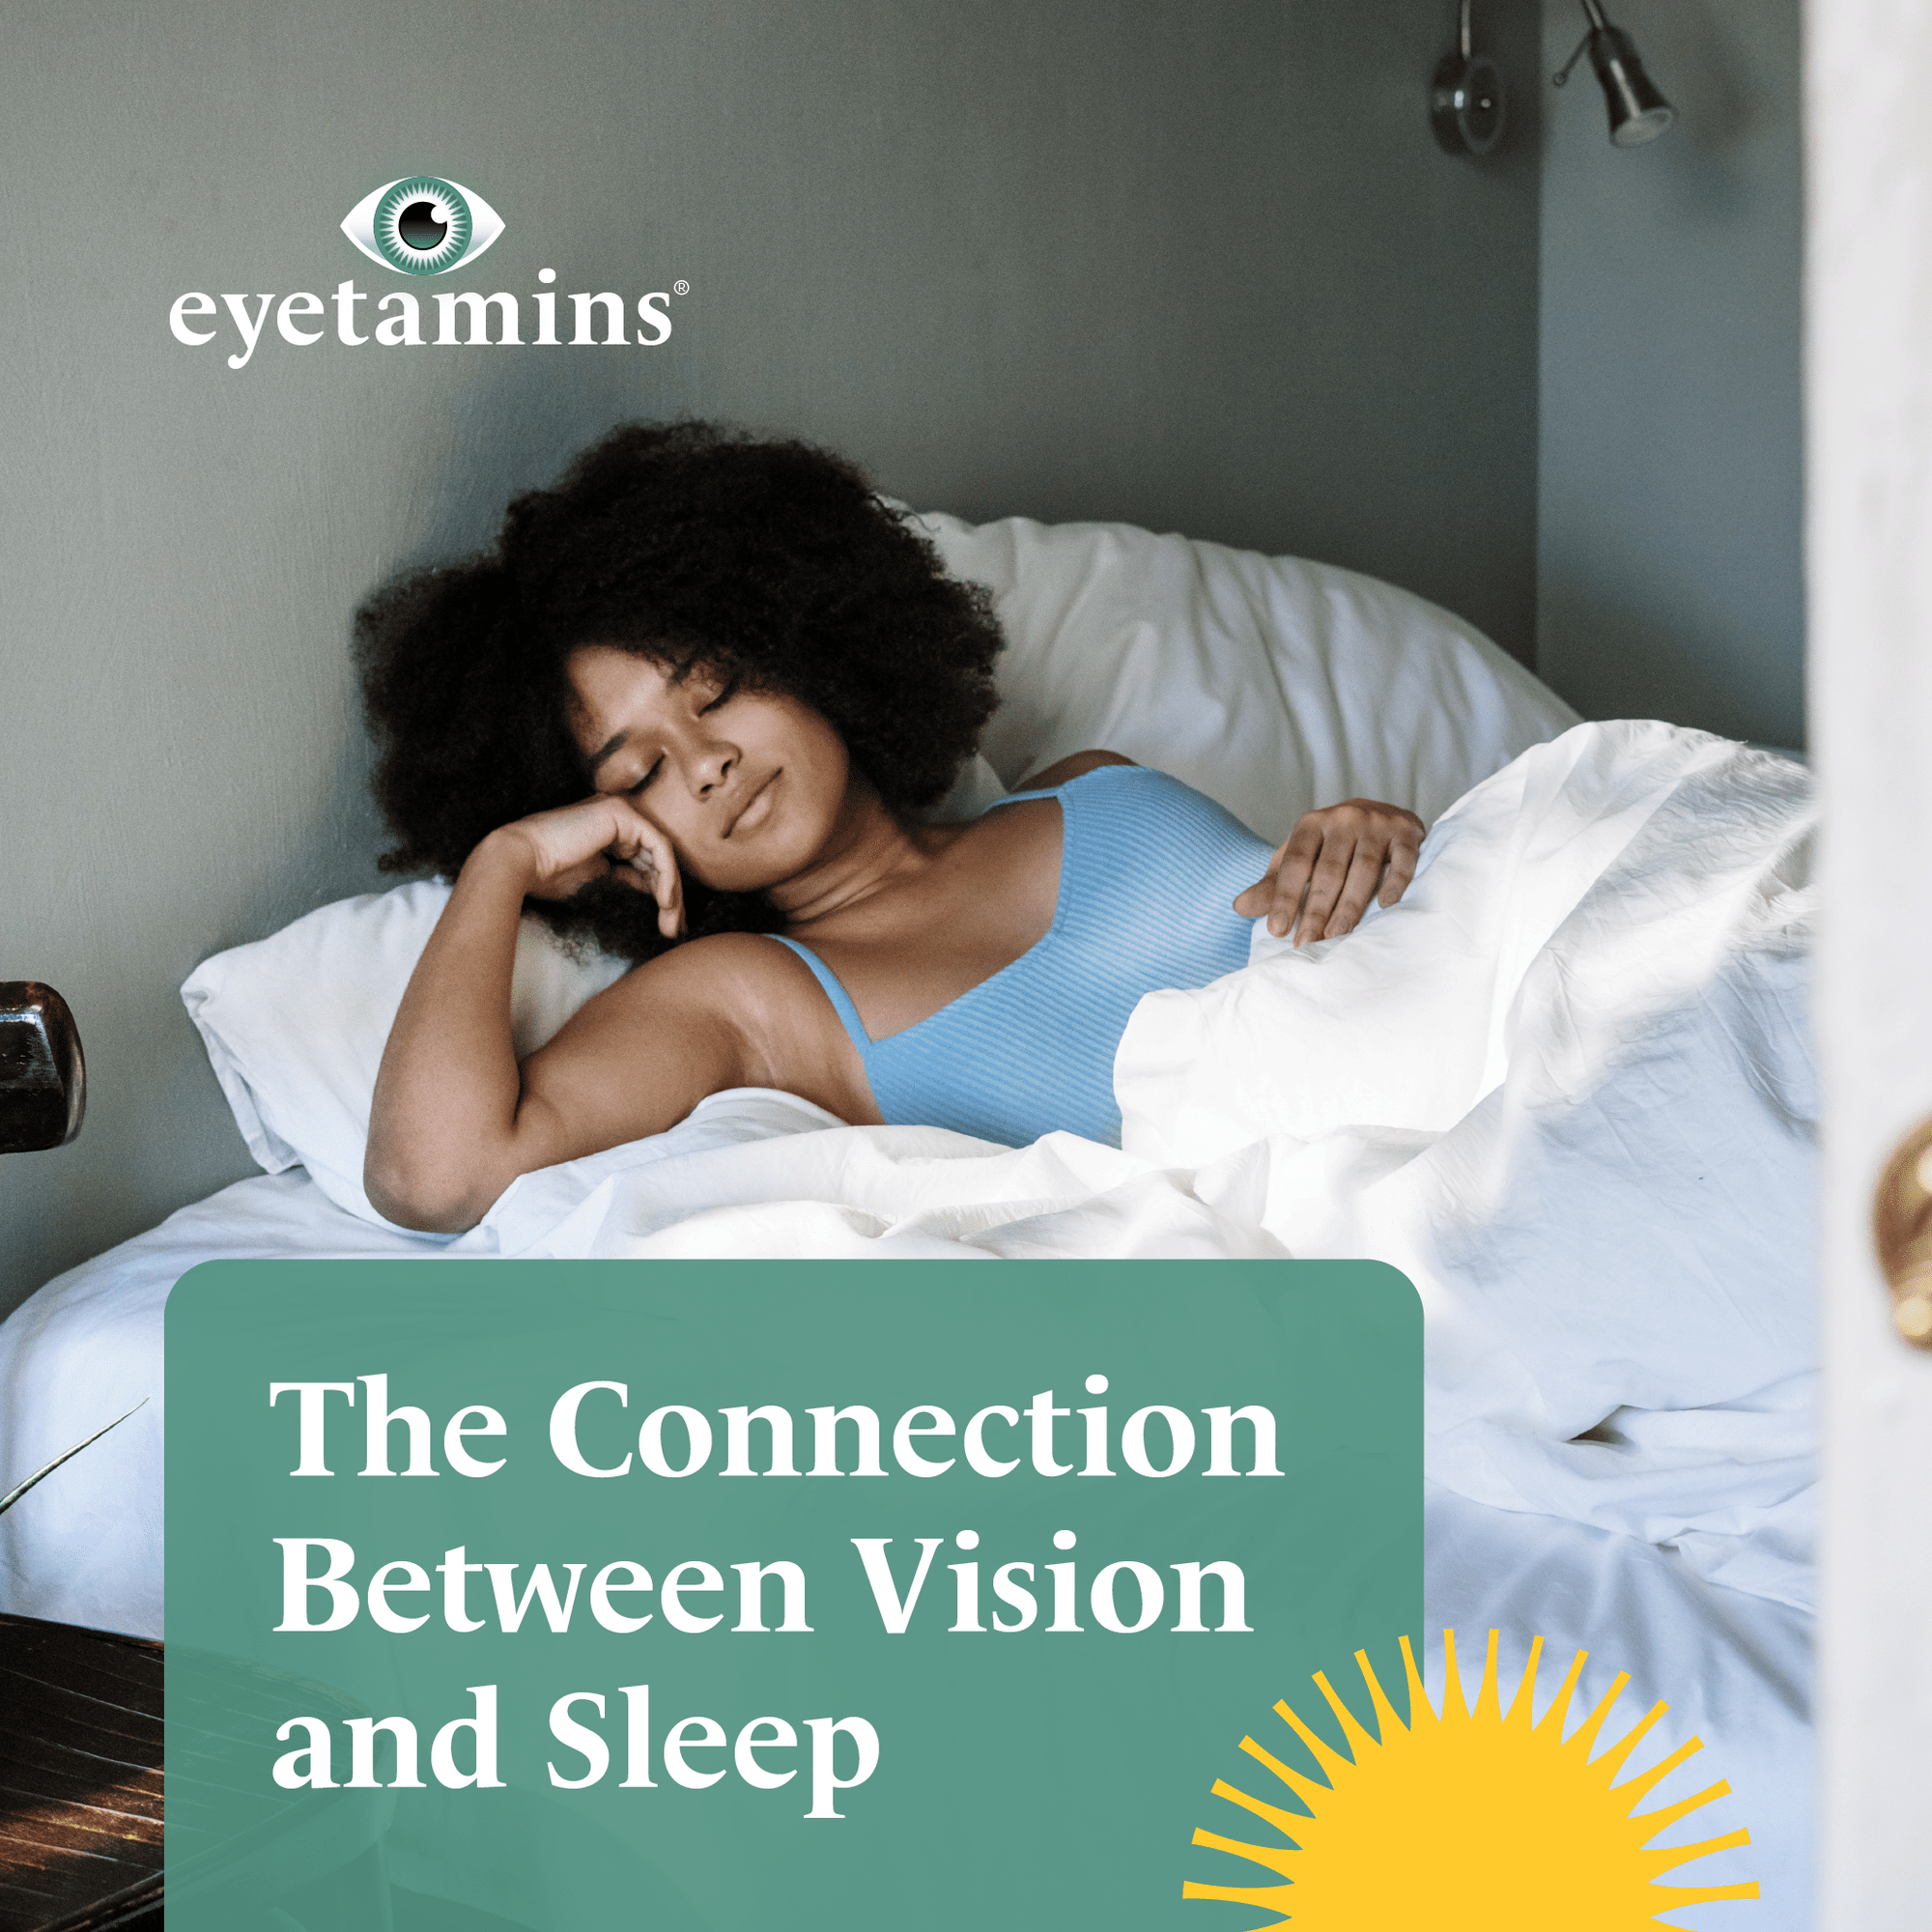 Eyetamins - The Connection Between Vision and Sleep